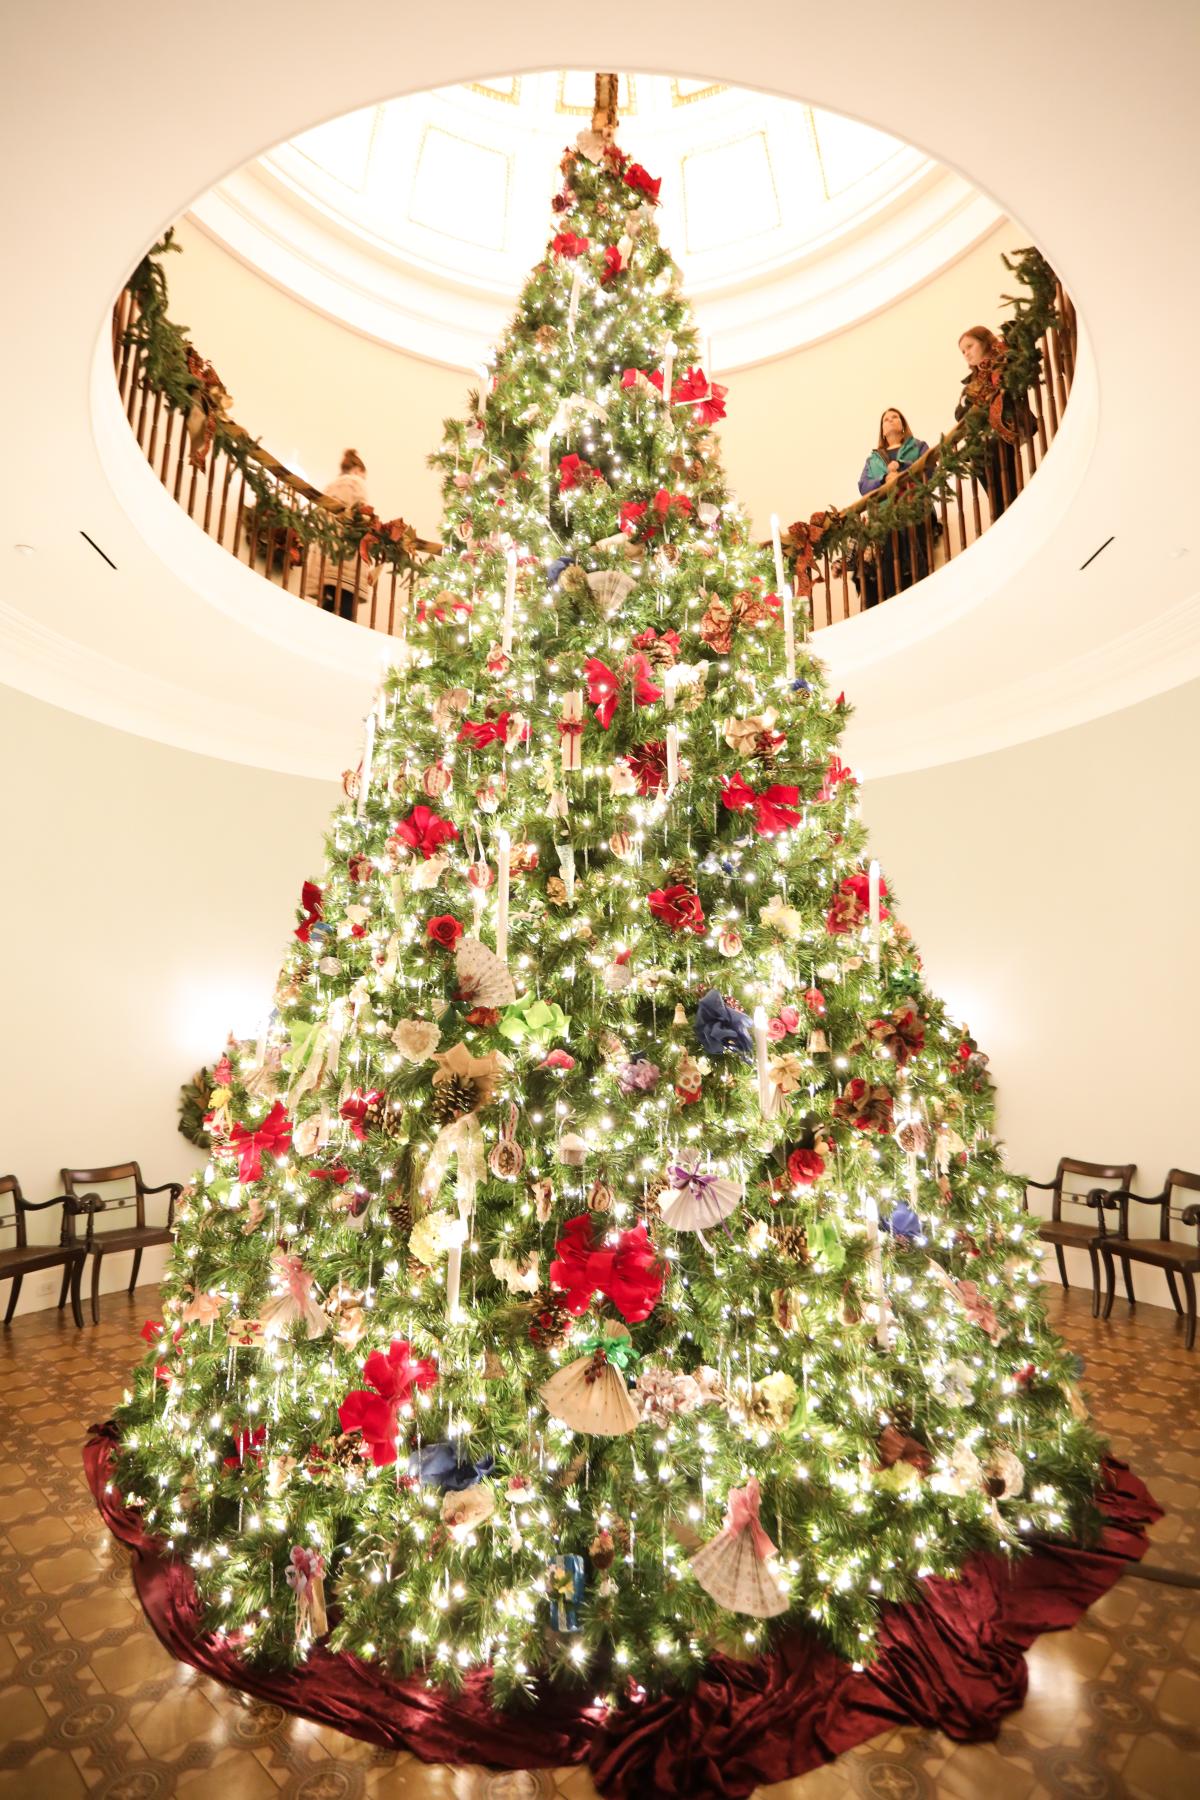 Christmas Tree at Georgia's Old Governor's Mansion